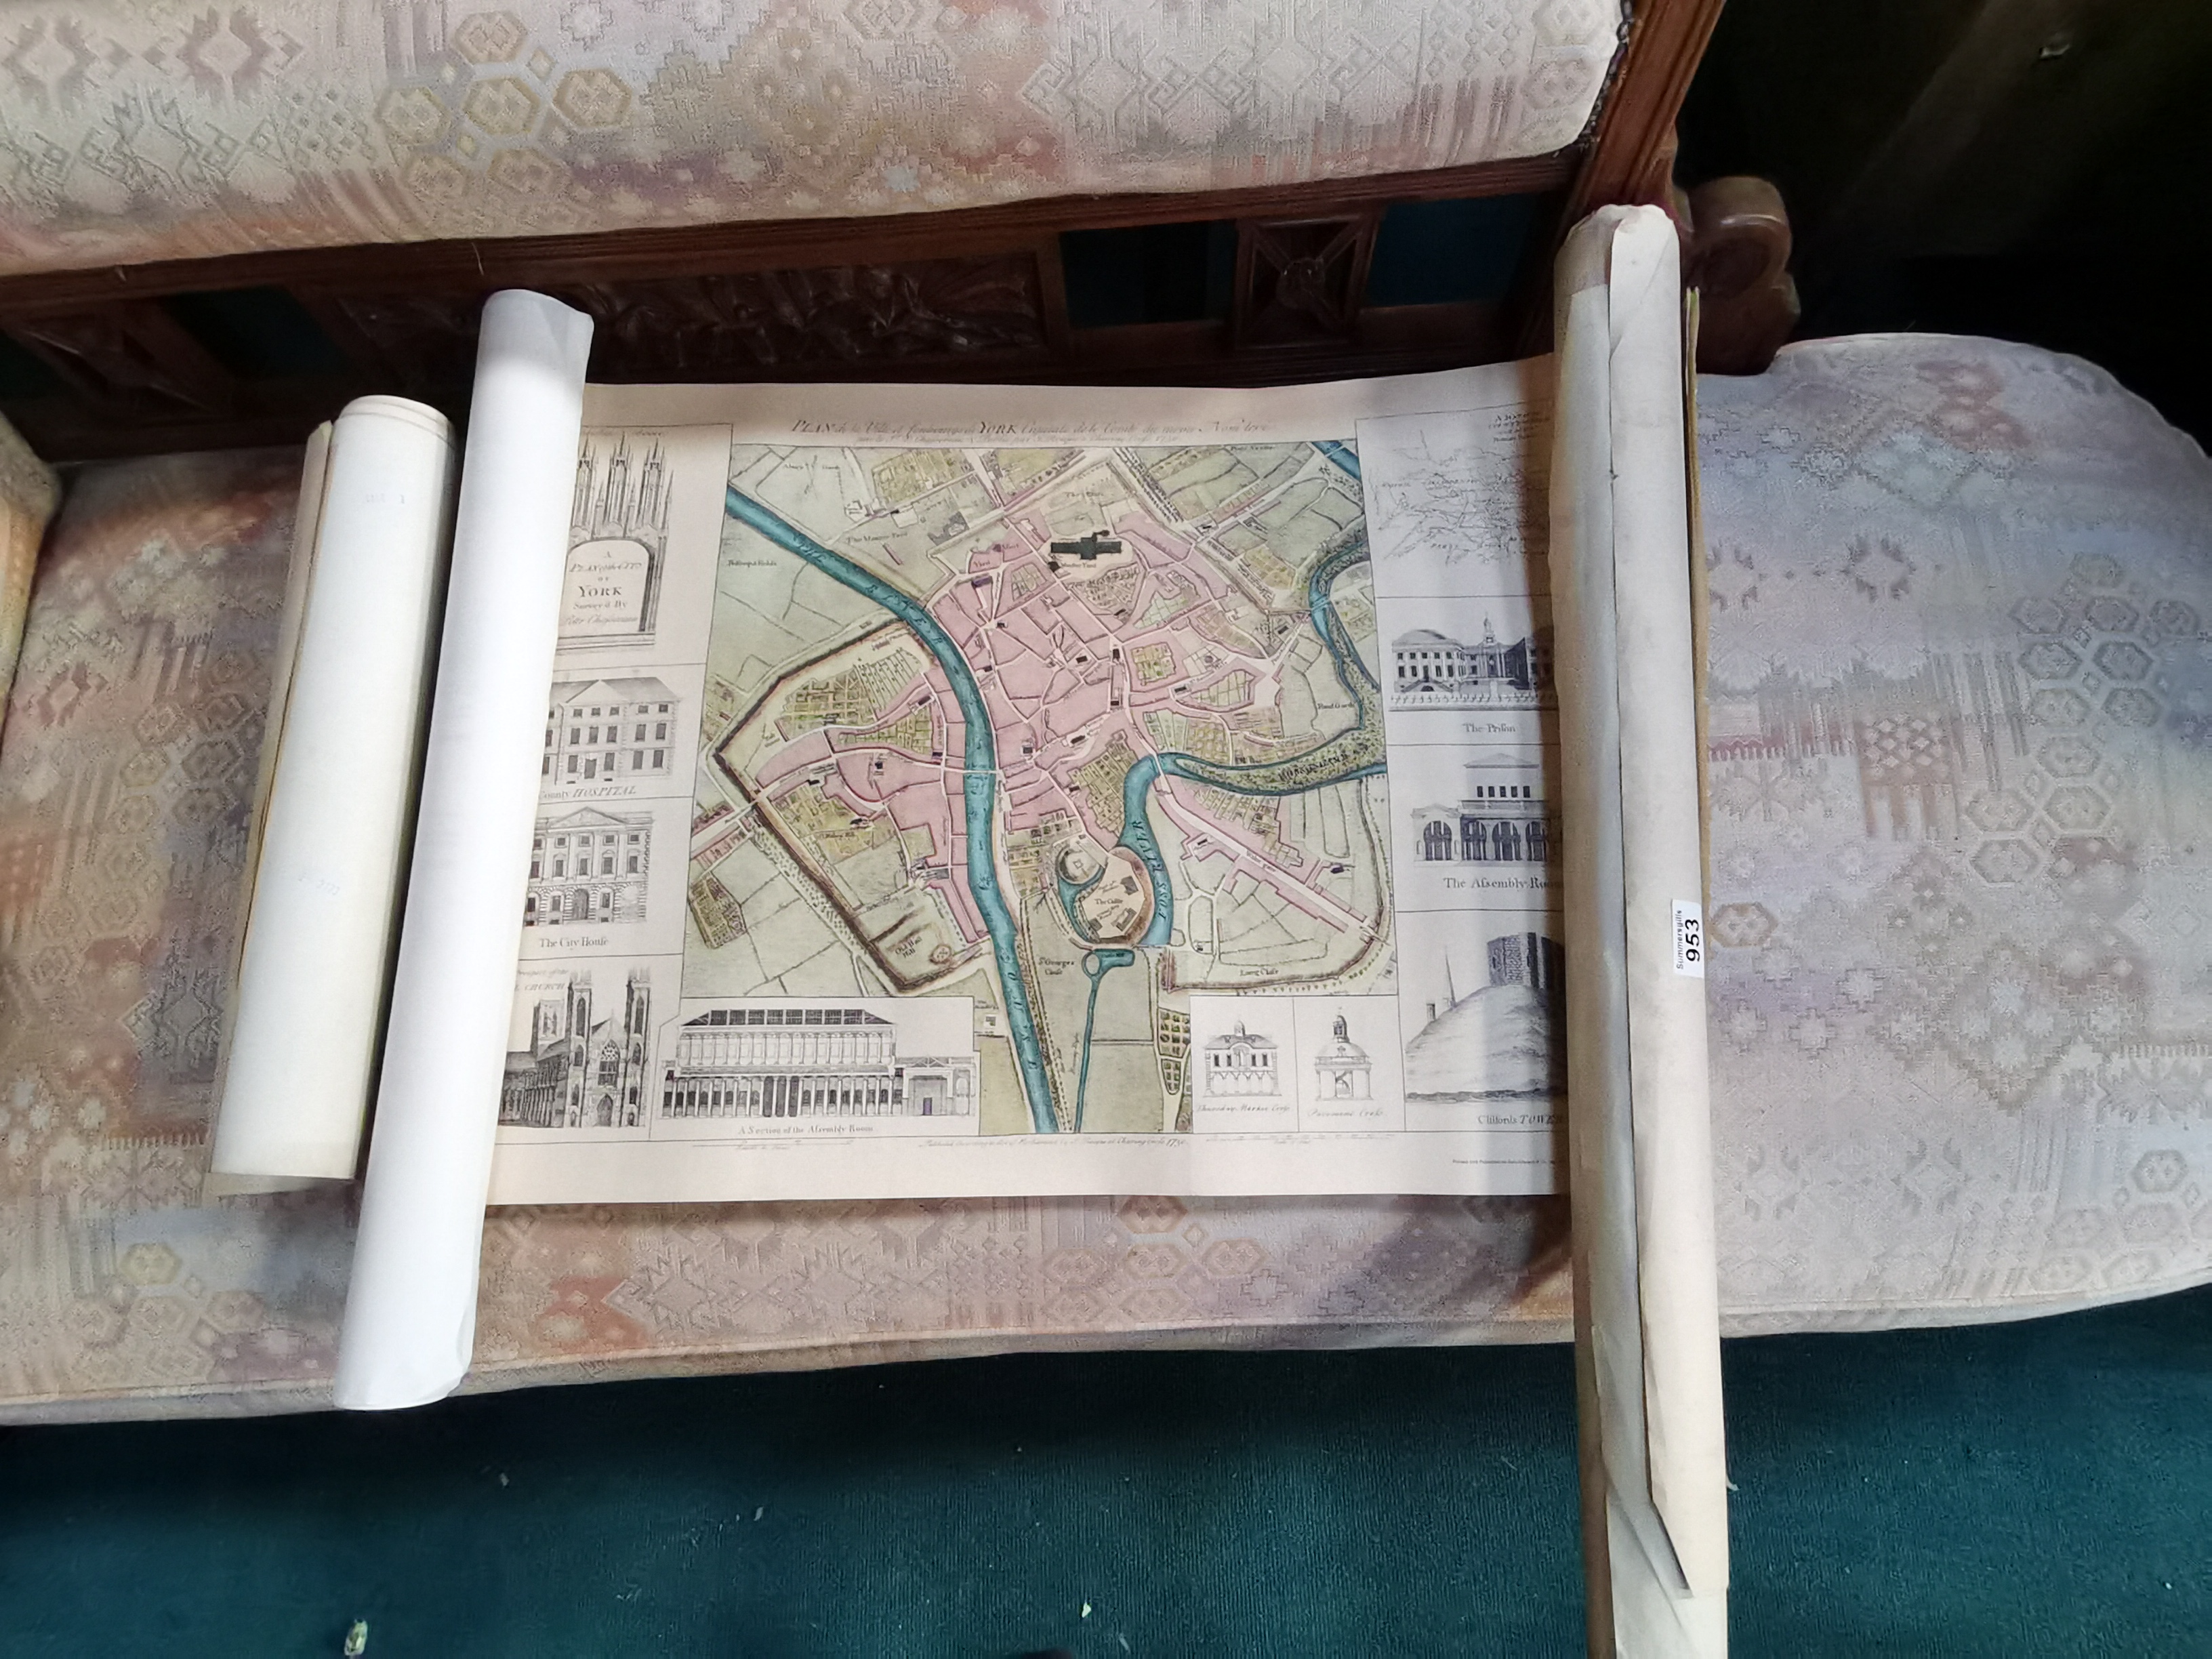 Maps and plans incl York, Ouseburn